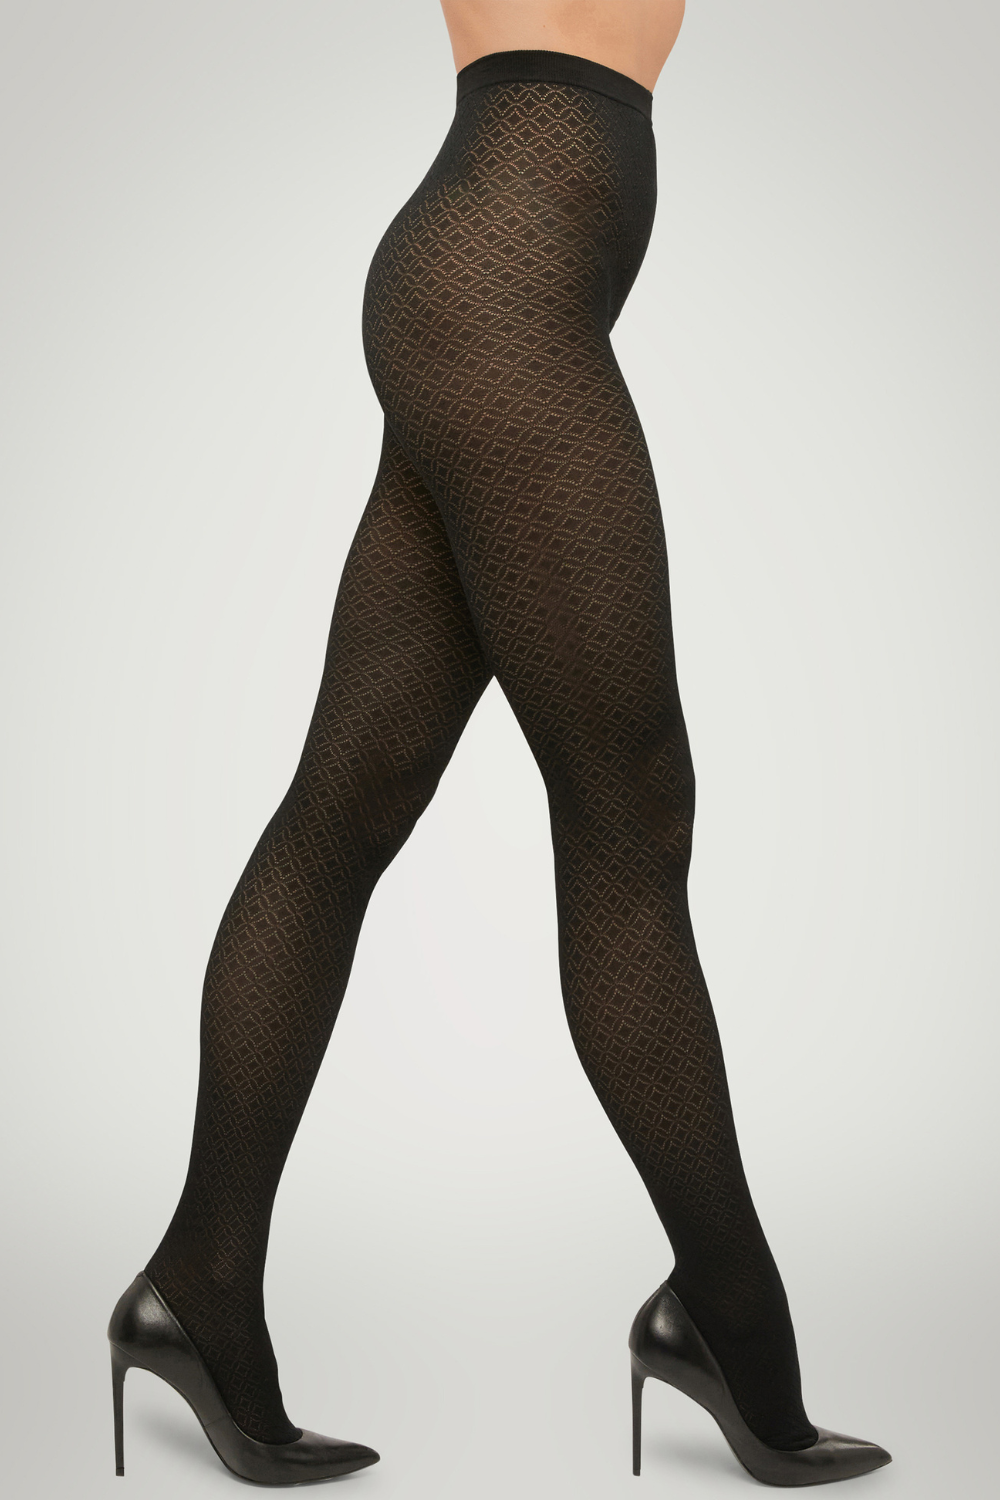 Wolford Pattern Tights Black – Naughty Knickers